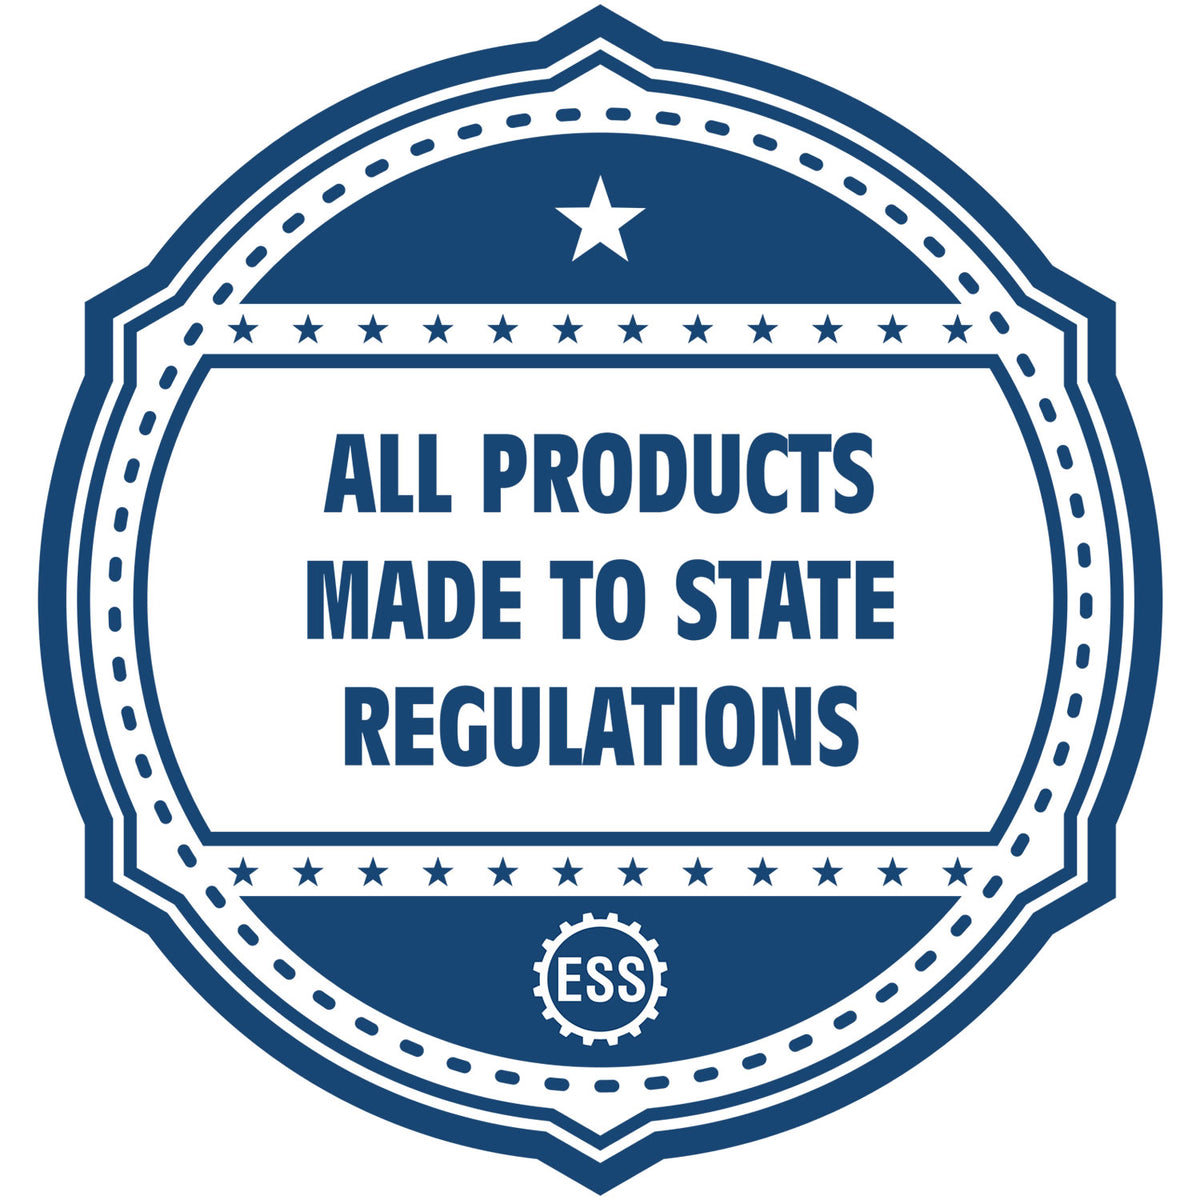 A blue icon or badge for the Hybrid Nebraska Landscape Architect Seal showing that this product is made in compliance with state regulations.